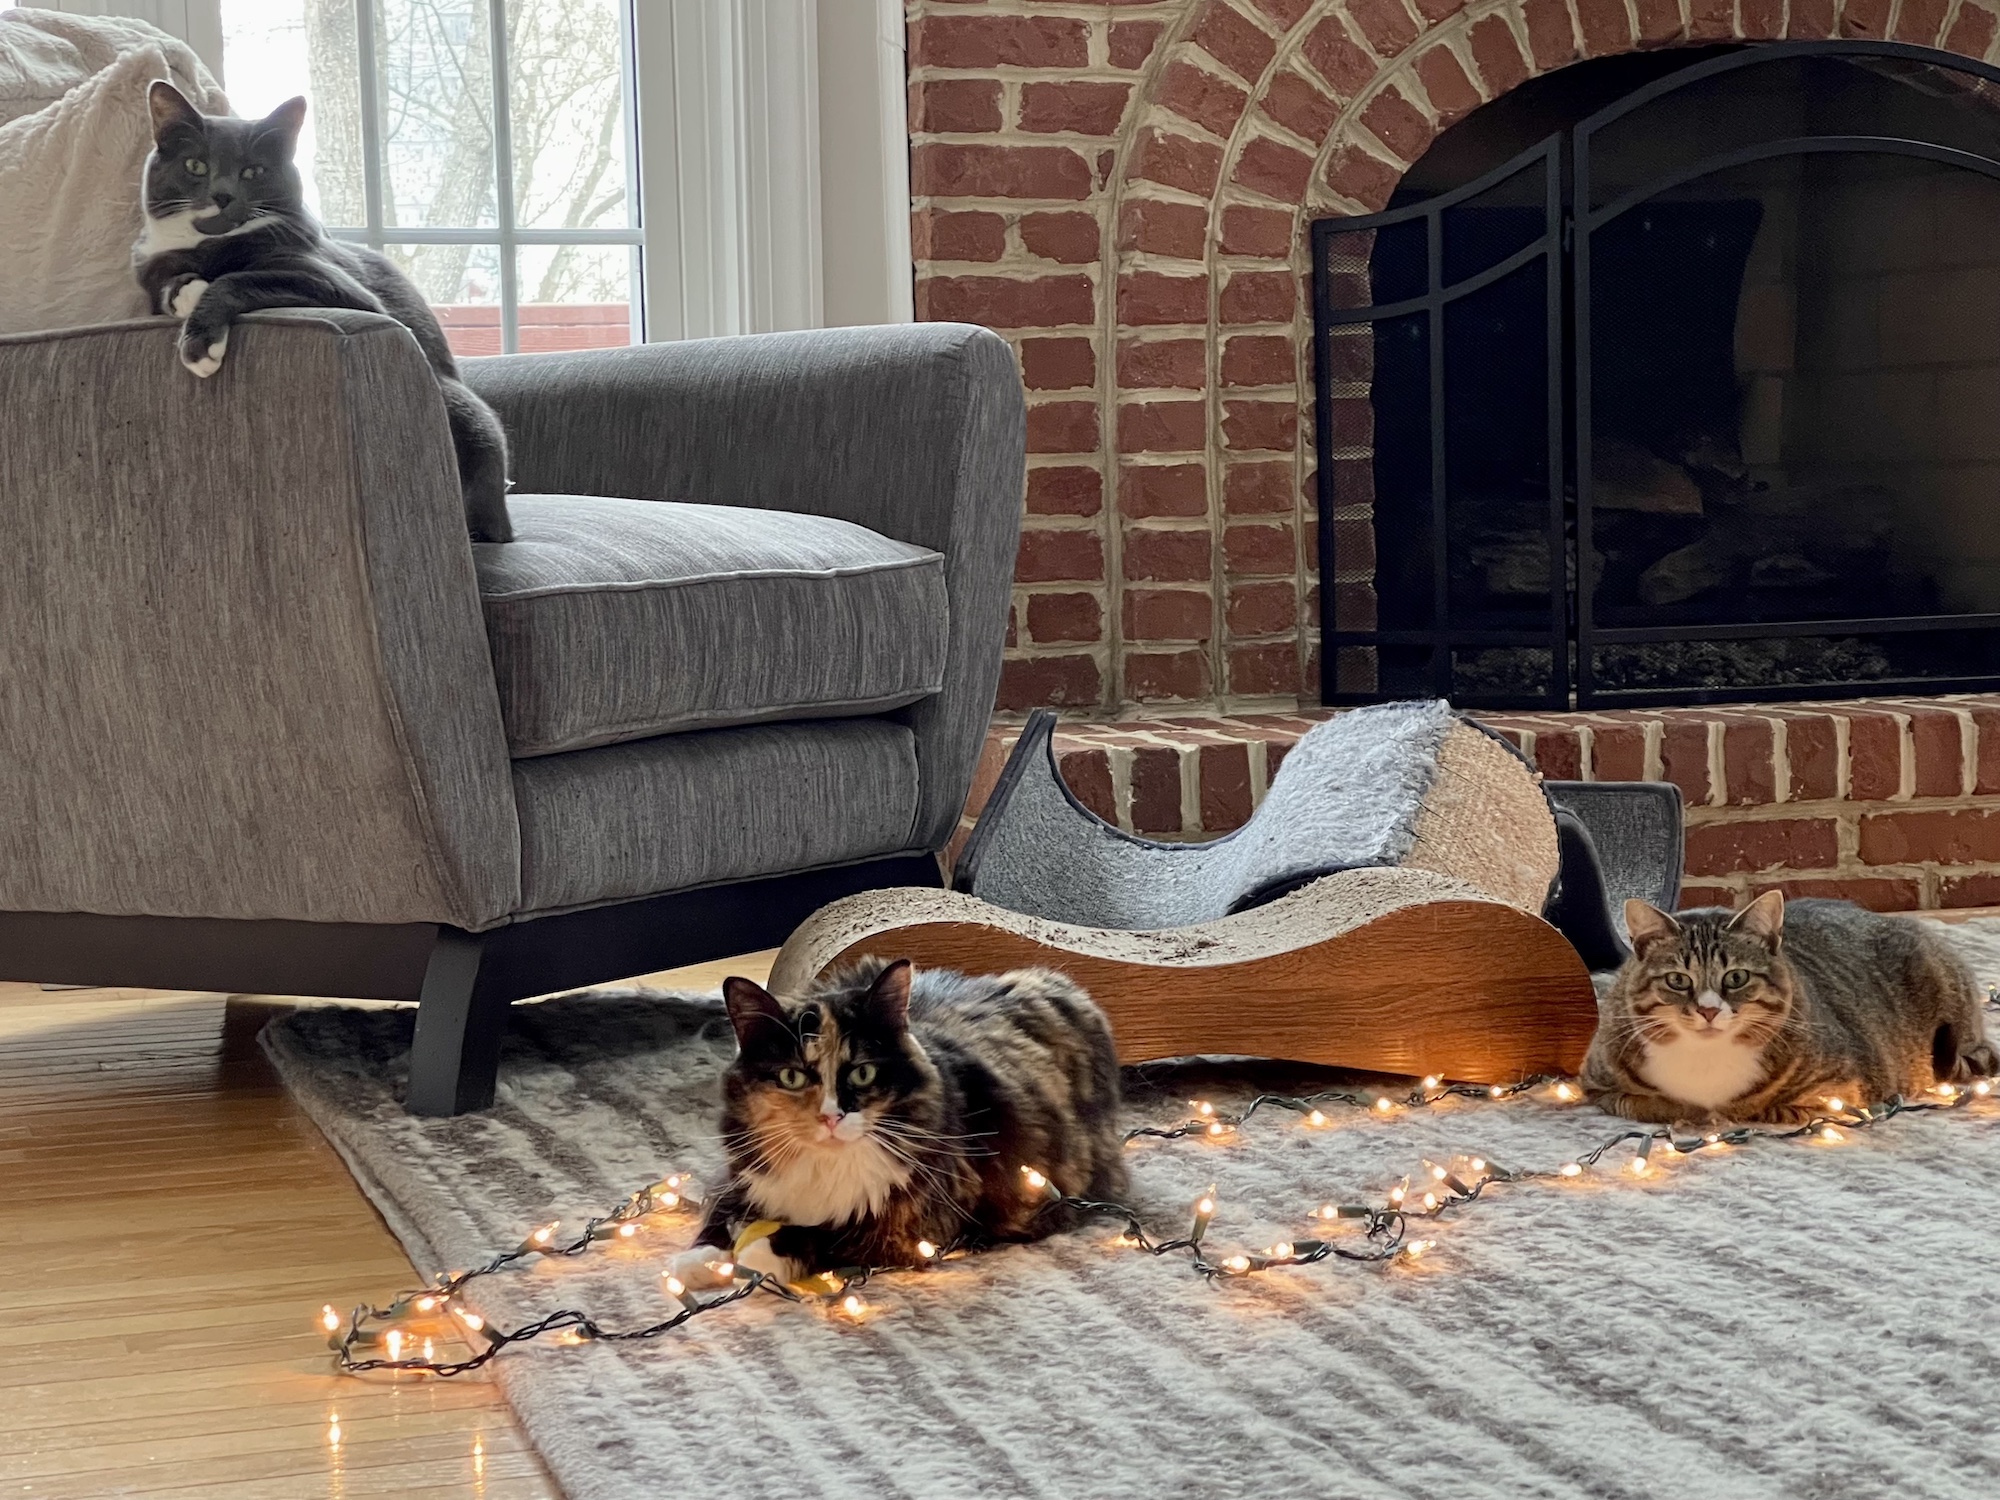 https://www.askamanager.org/wp-content/uploads/2022/12/cats-with-lights.jpg